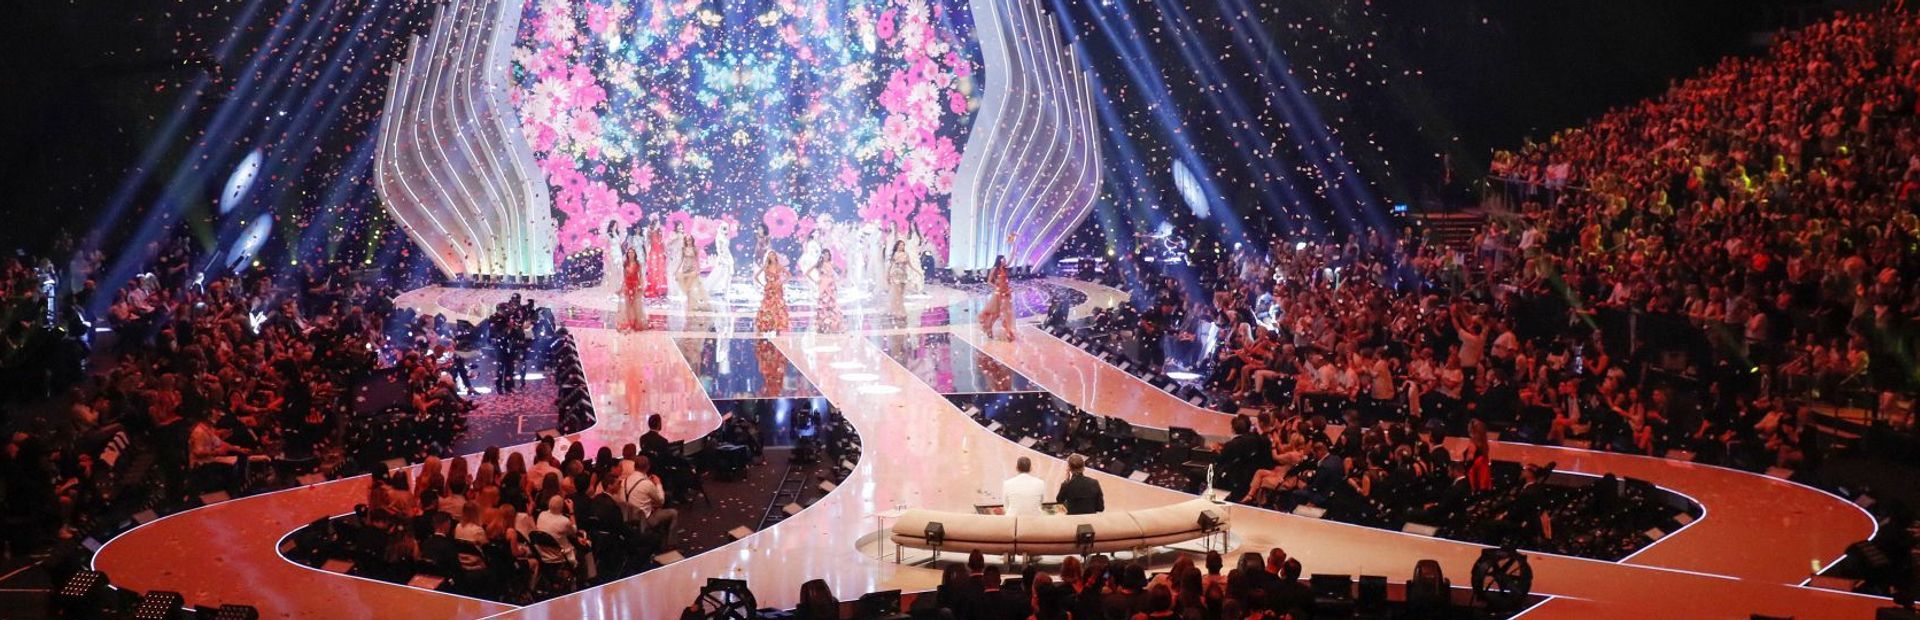 HOW OUR VALUE CHAIN AROUND #GNTM MAKES THE SHOW SUCCESSFUL